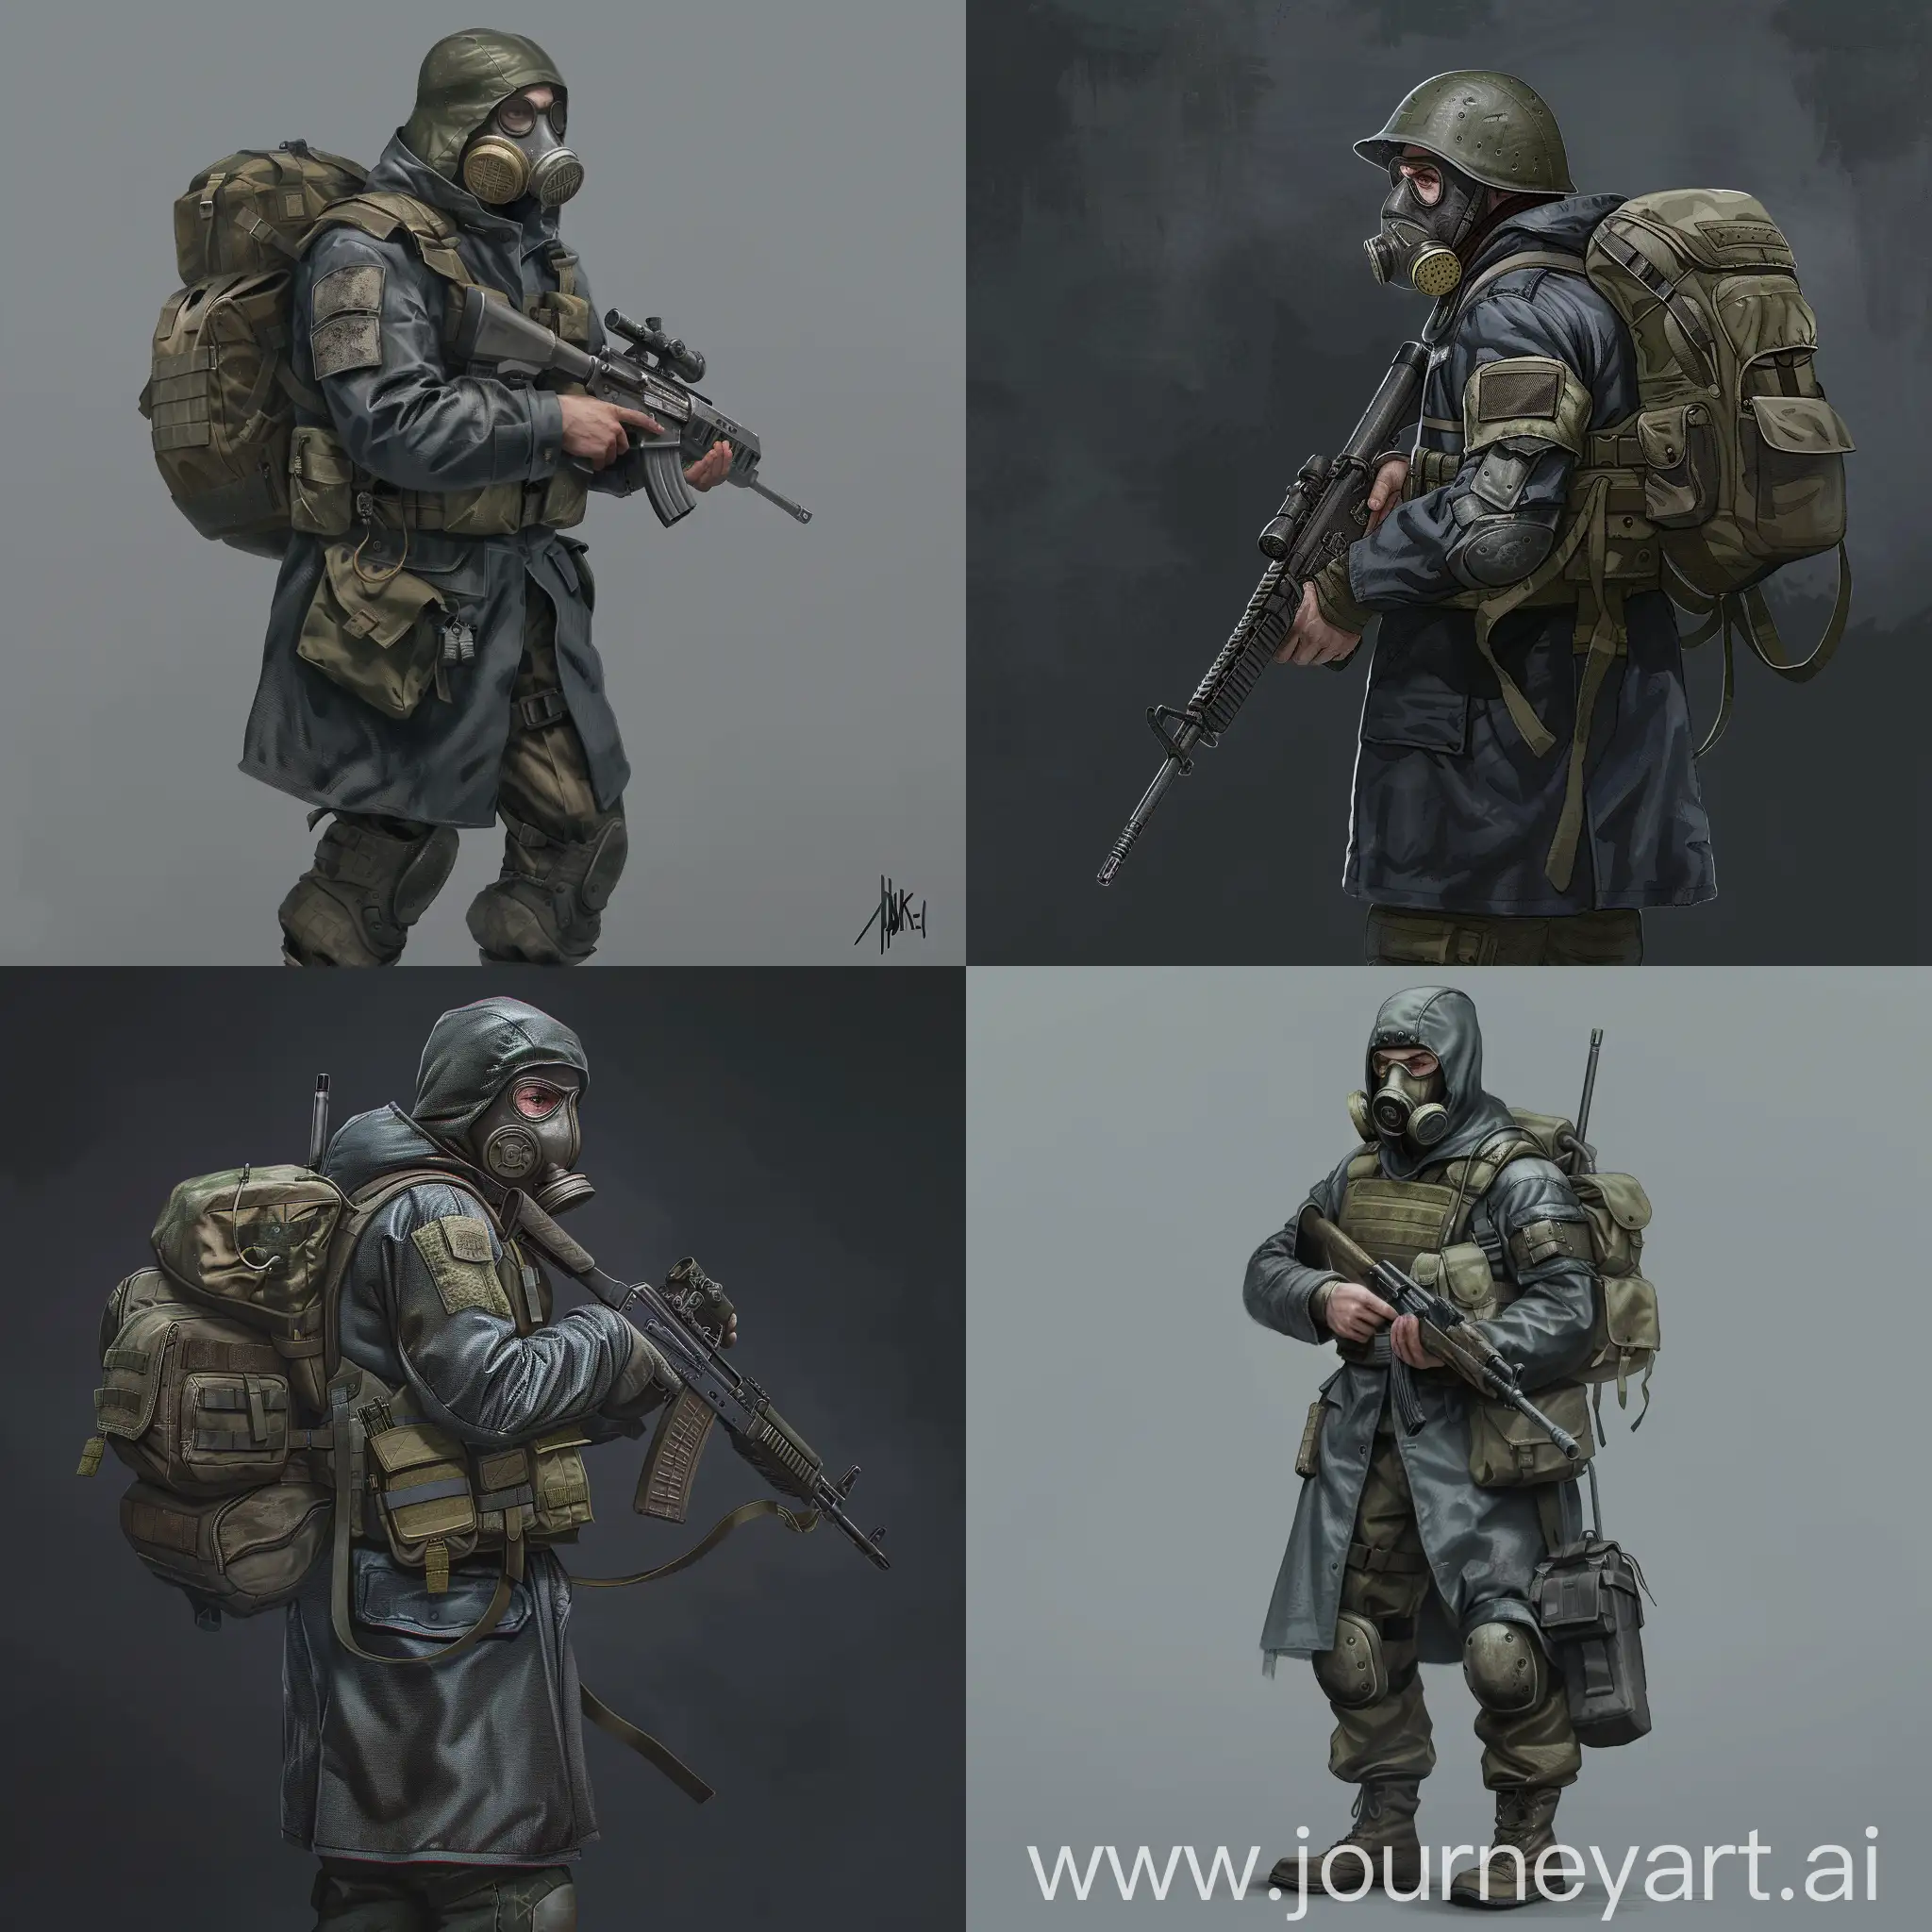 Digital character design, mercenary from the universe of S.T.A.L.K.E.R., dressed in a dark blue military raincoat, gray military armor on his body, a gasmask on his face, a military backpack on his back, a rifle in his hands.